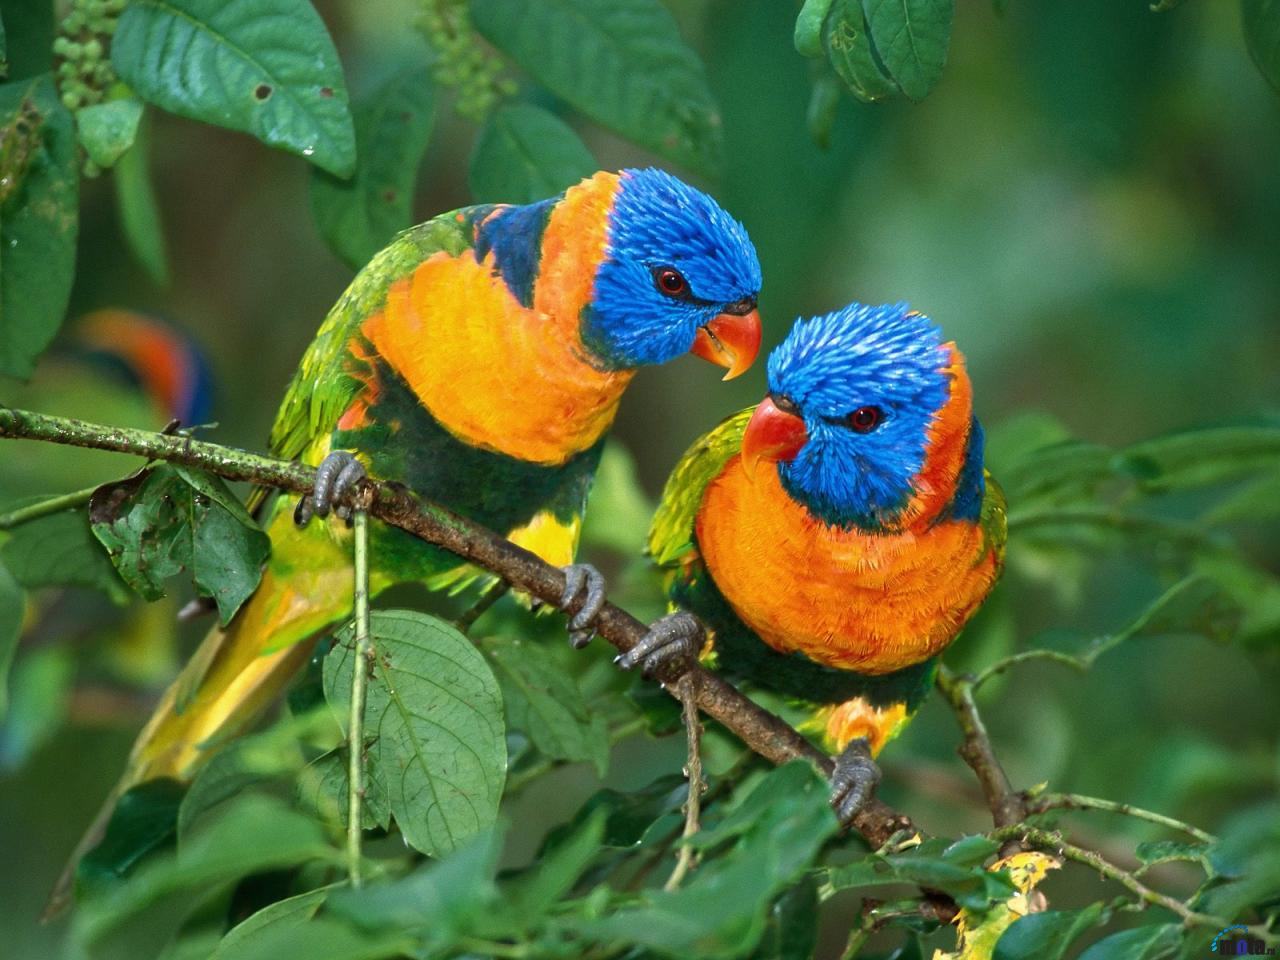 Beautiful Colorful Birds  Infotainment - Entertainment with Knowledge